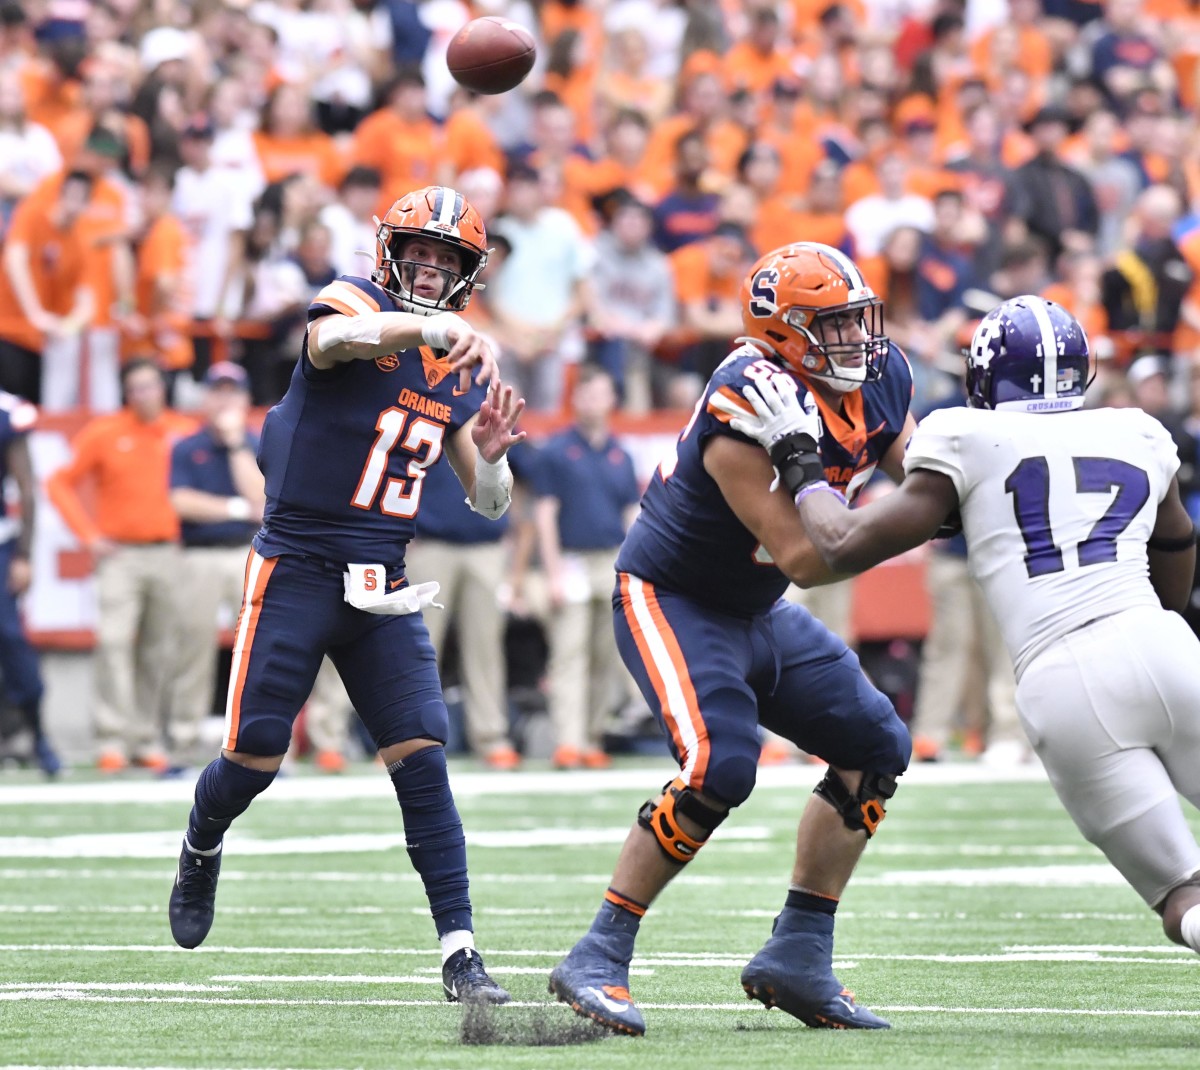 Tommy DeVito has thrown for 11 touchdowns for the Orange this season (Mark Konezny/USAToday sports)